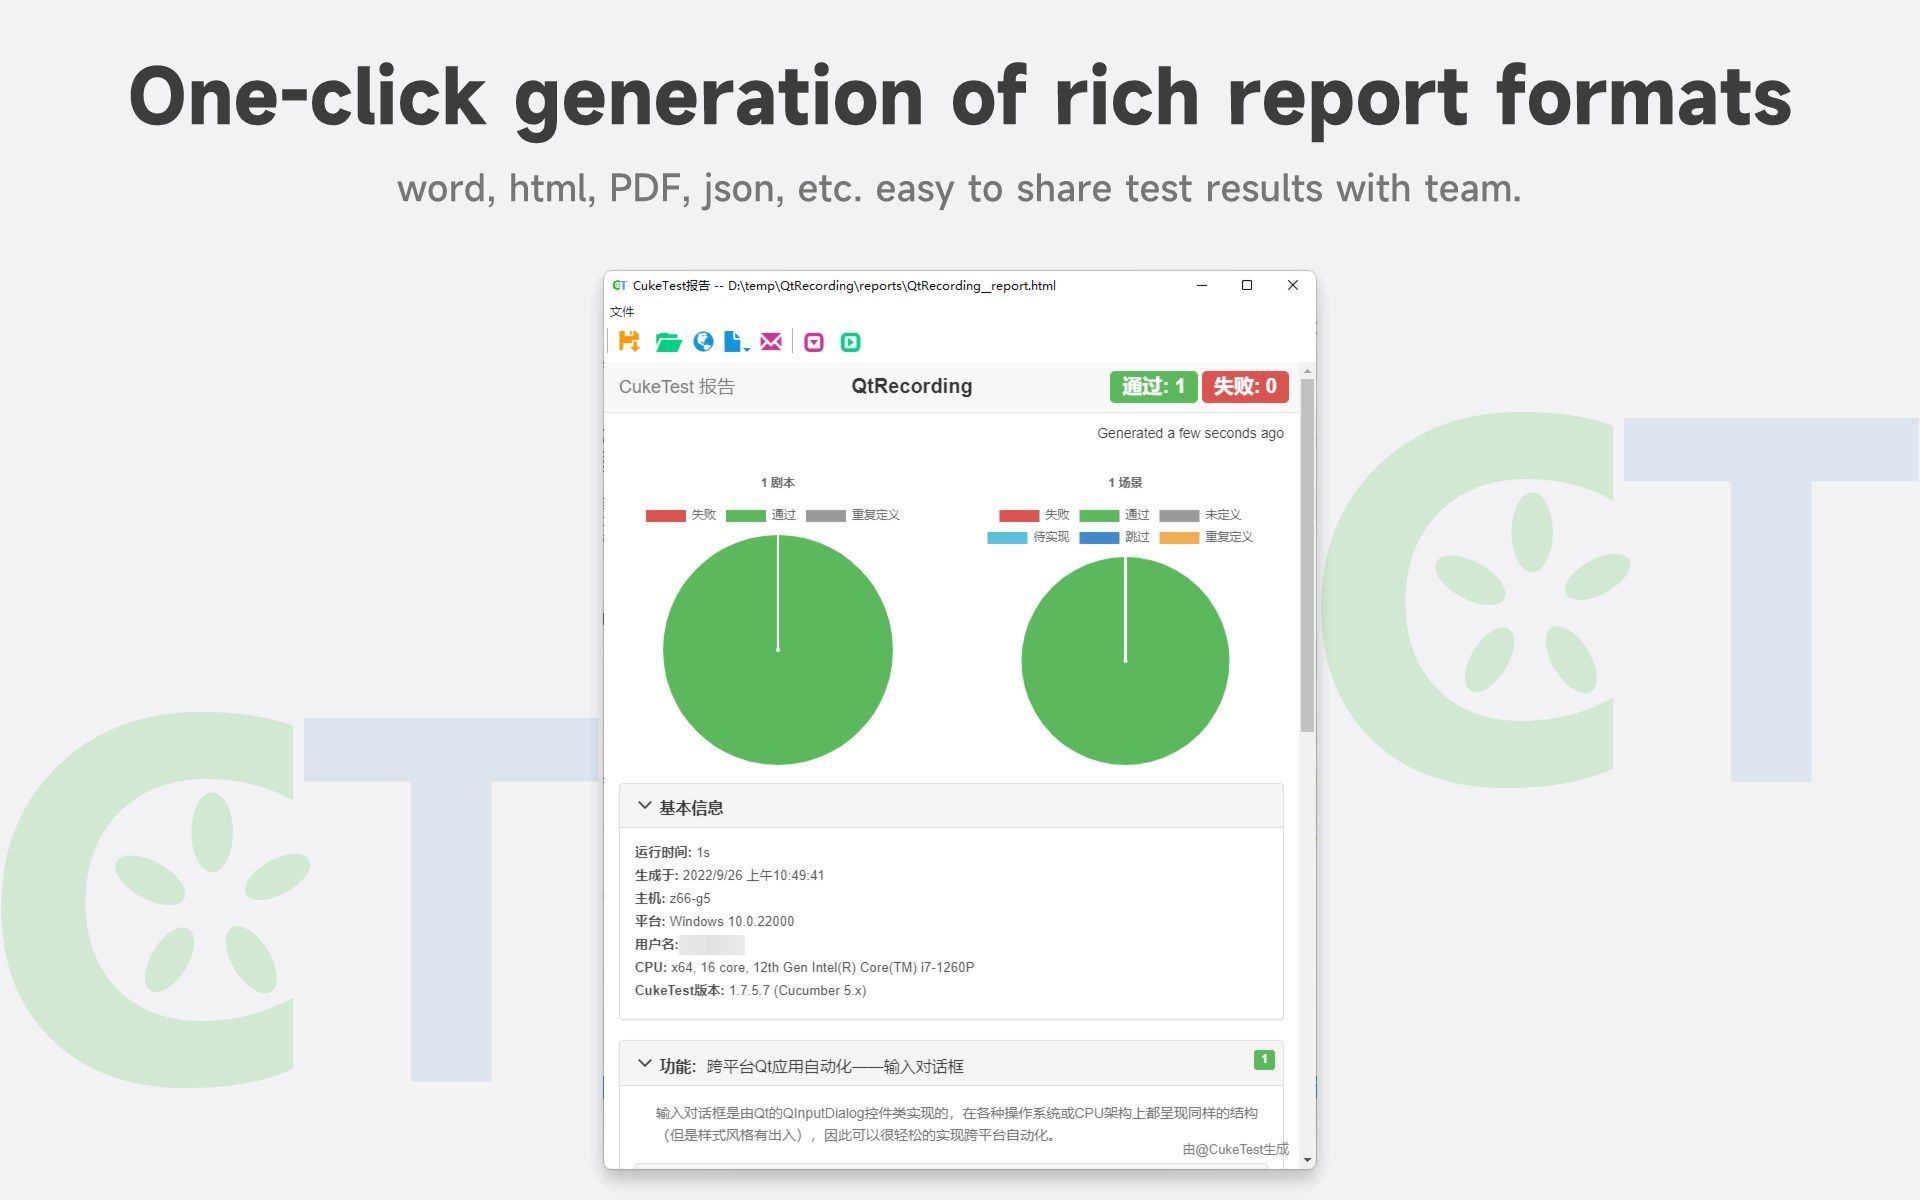 One-click generation of rich report formats